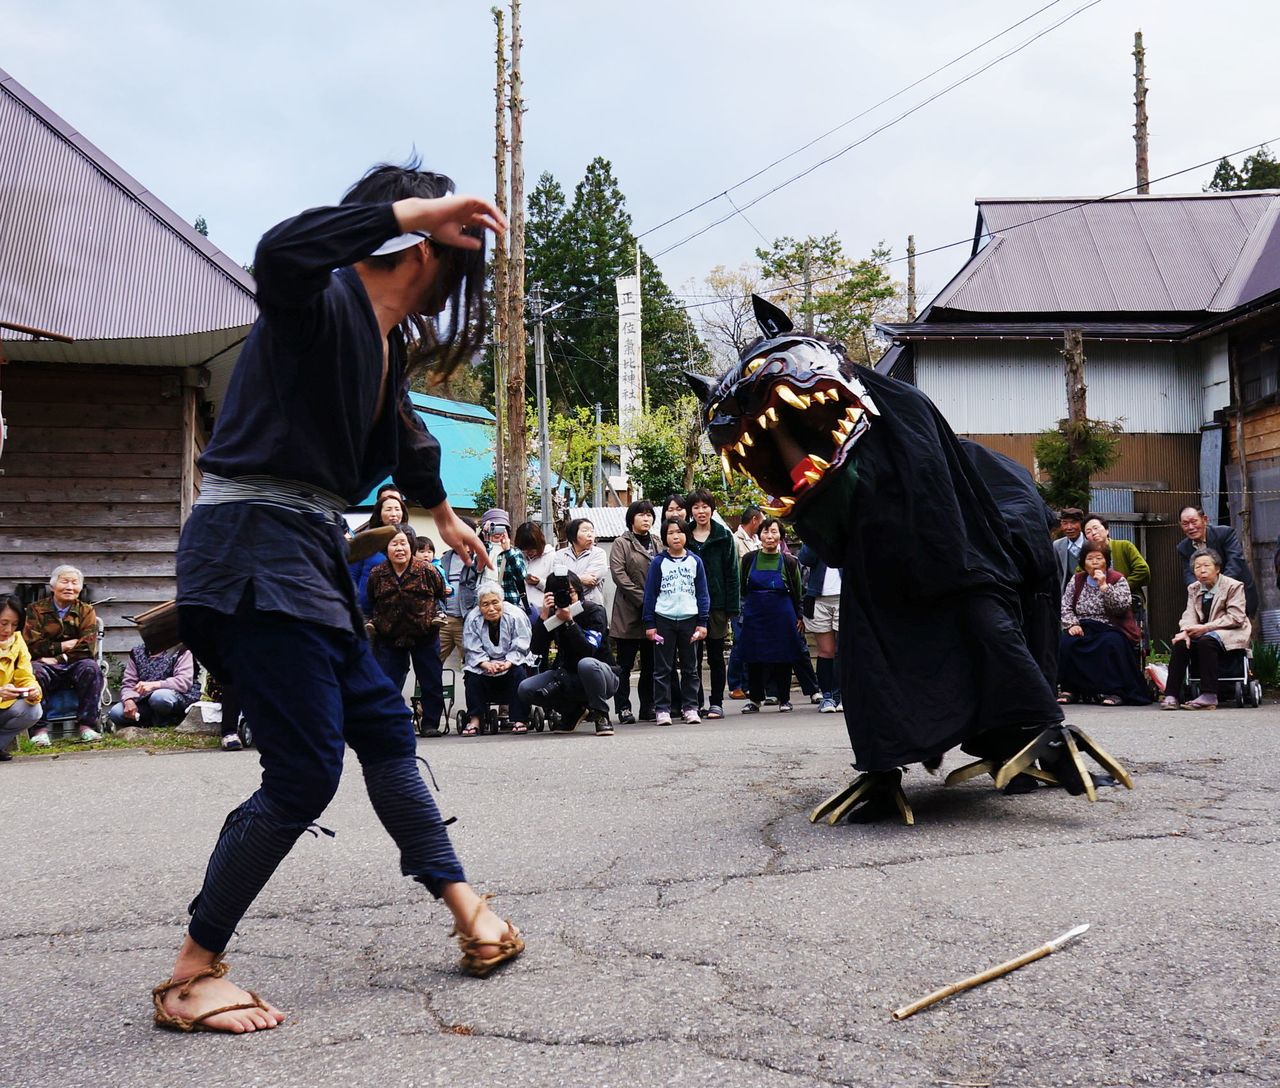 The May 2012 Nakanomata village spring festival featured a reenactment of the defeat of the nekomata, and it has been held several times since then. (© Kamiechigo Yamazato Fan Club)